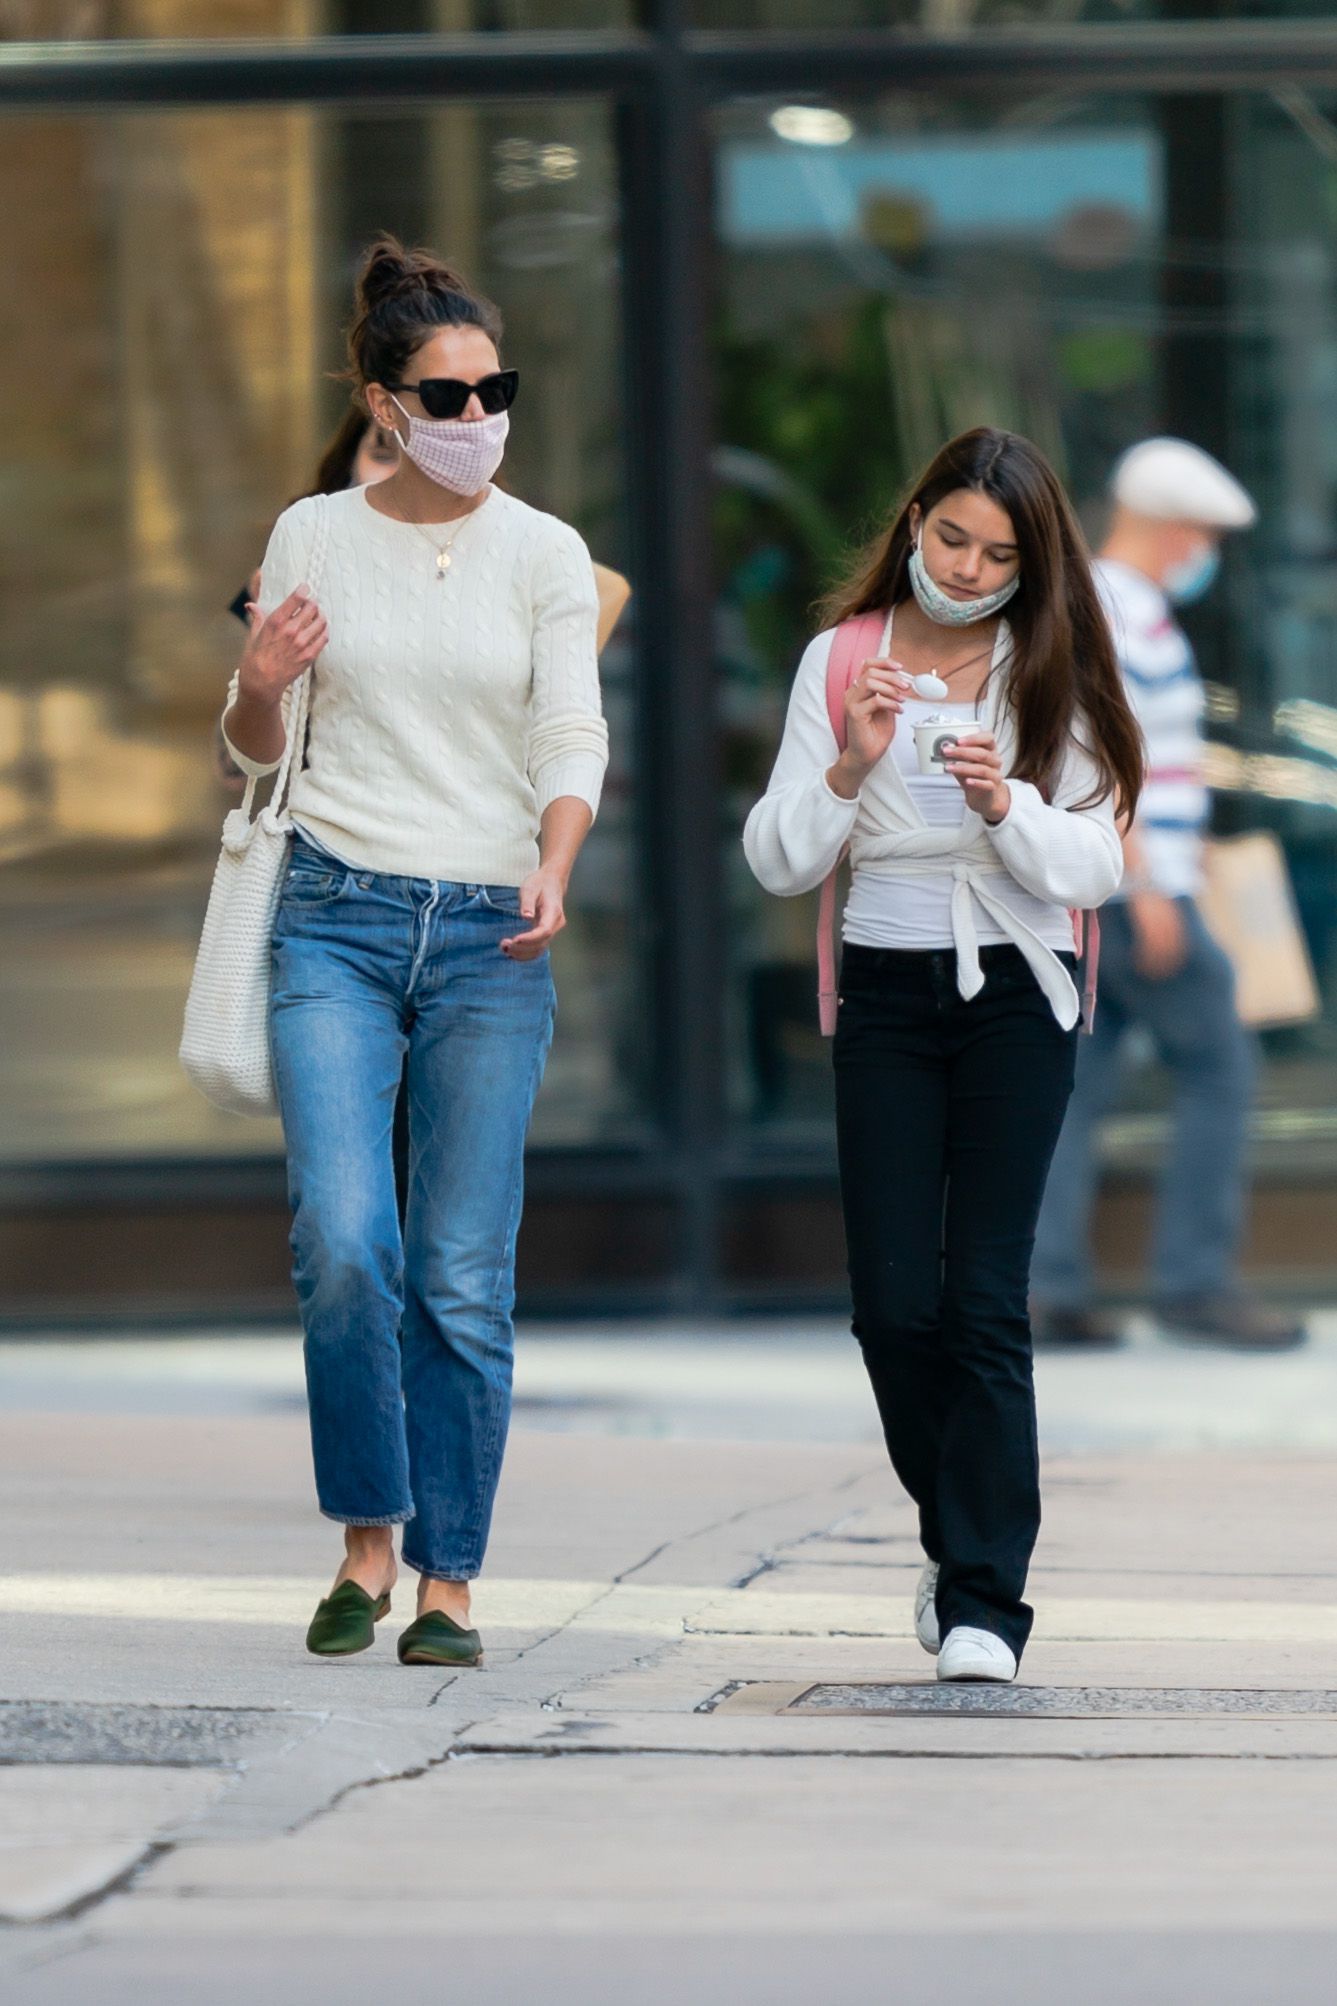 Katie Holmes and Suri Cruise in New York City on September 08, 2020. | Source: Getty Images